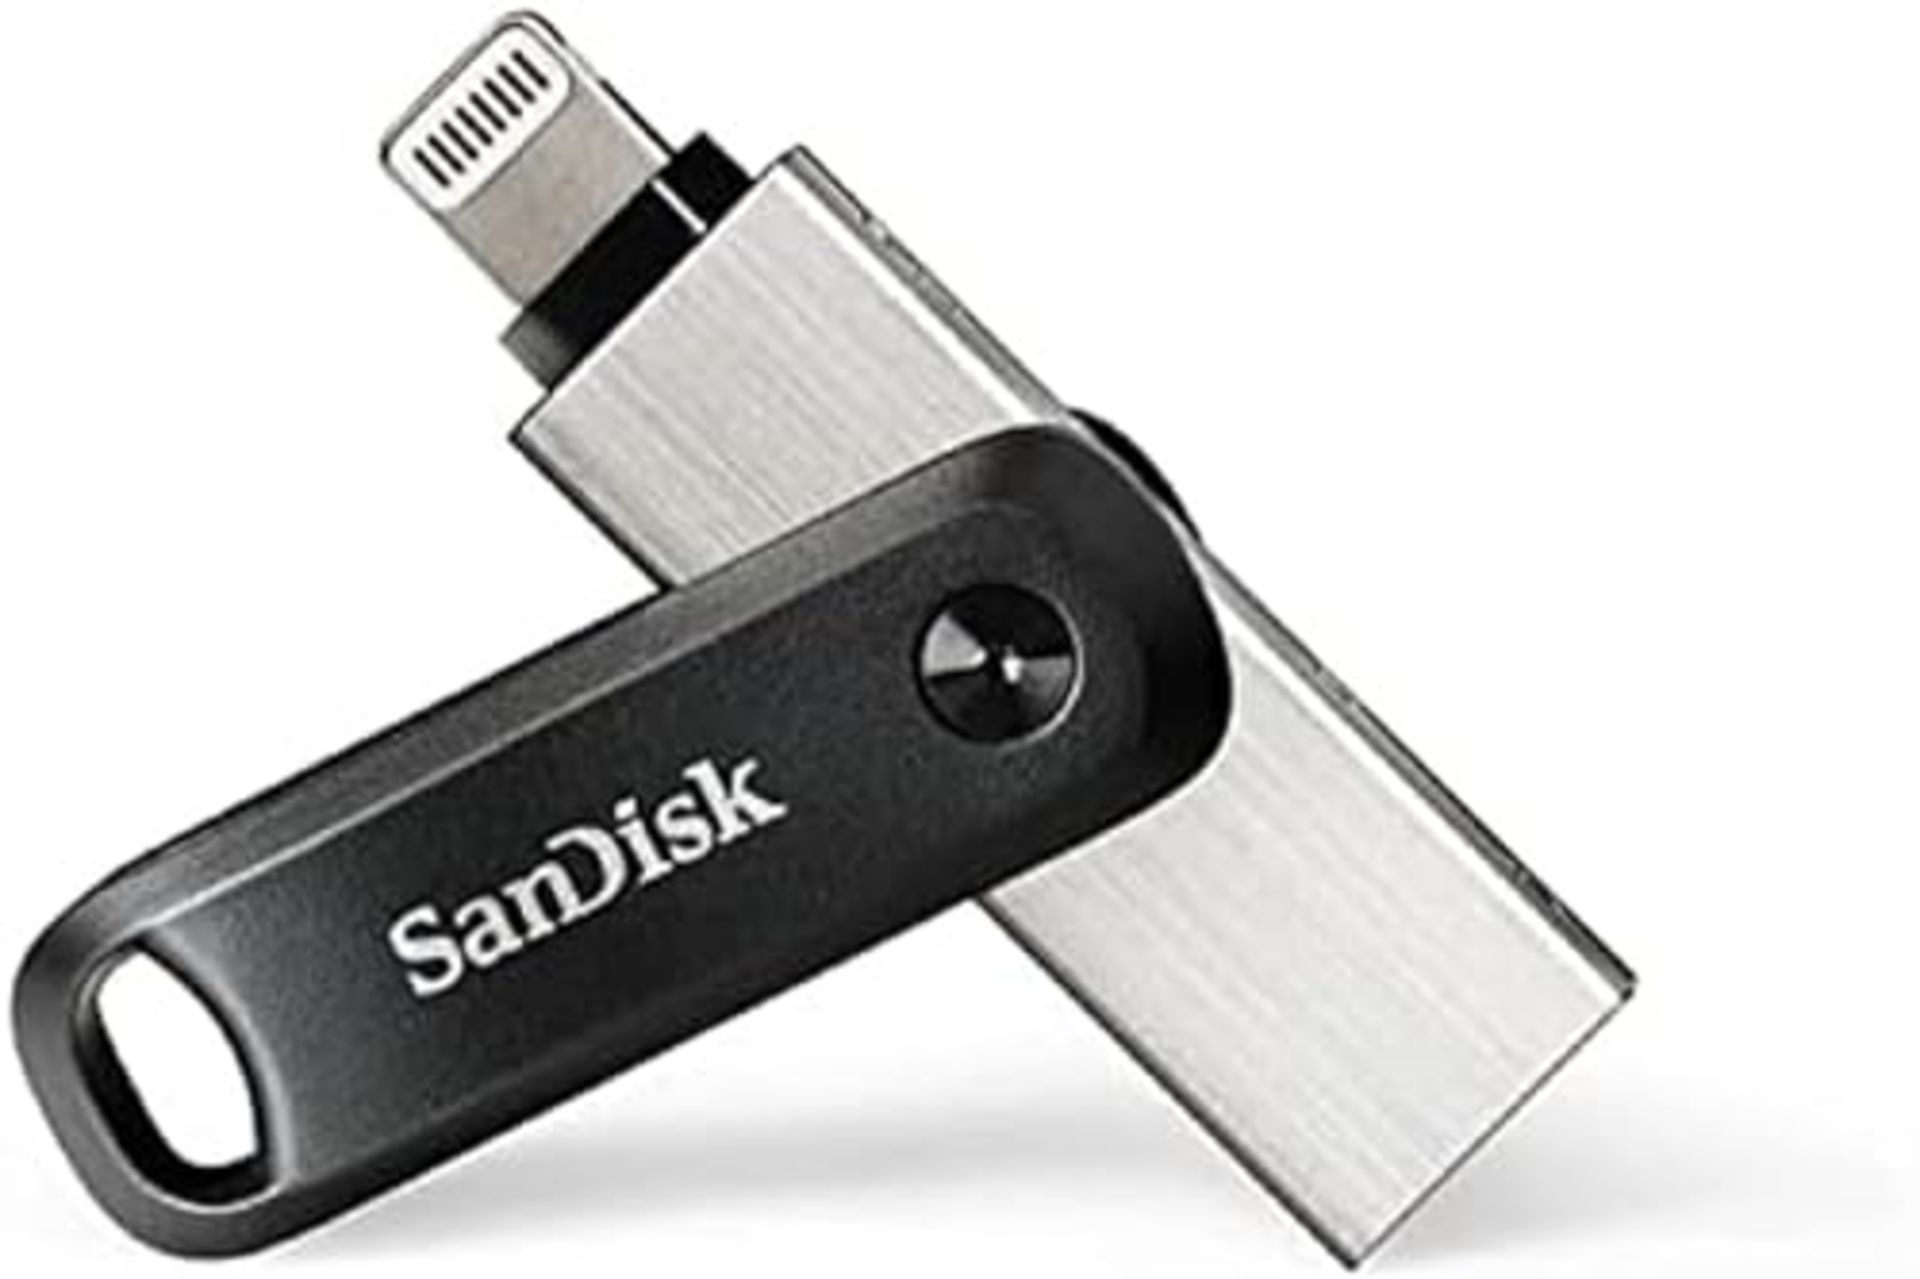 SanDisk iXpand Go 128GB - Dual connector USB drive for backing up iPhone and iPad - Image 3 of 4